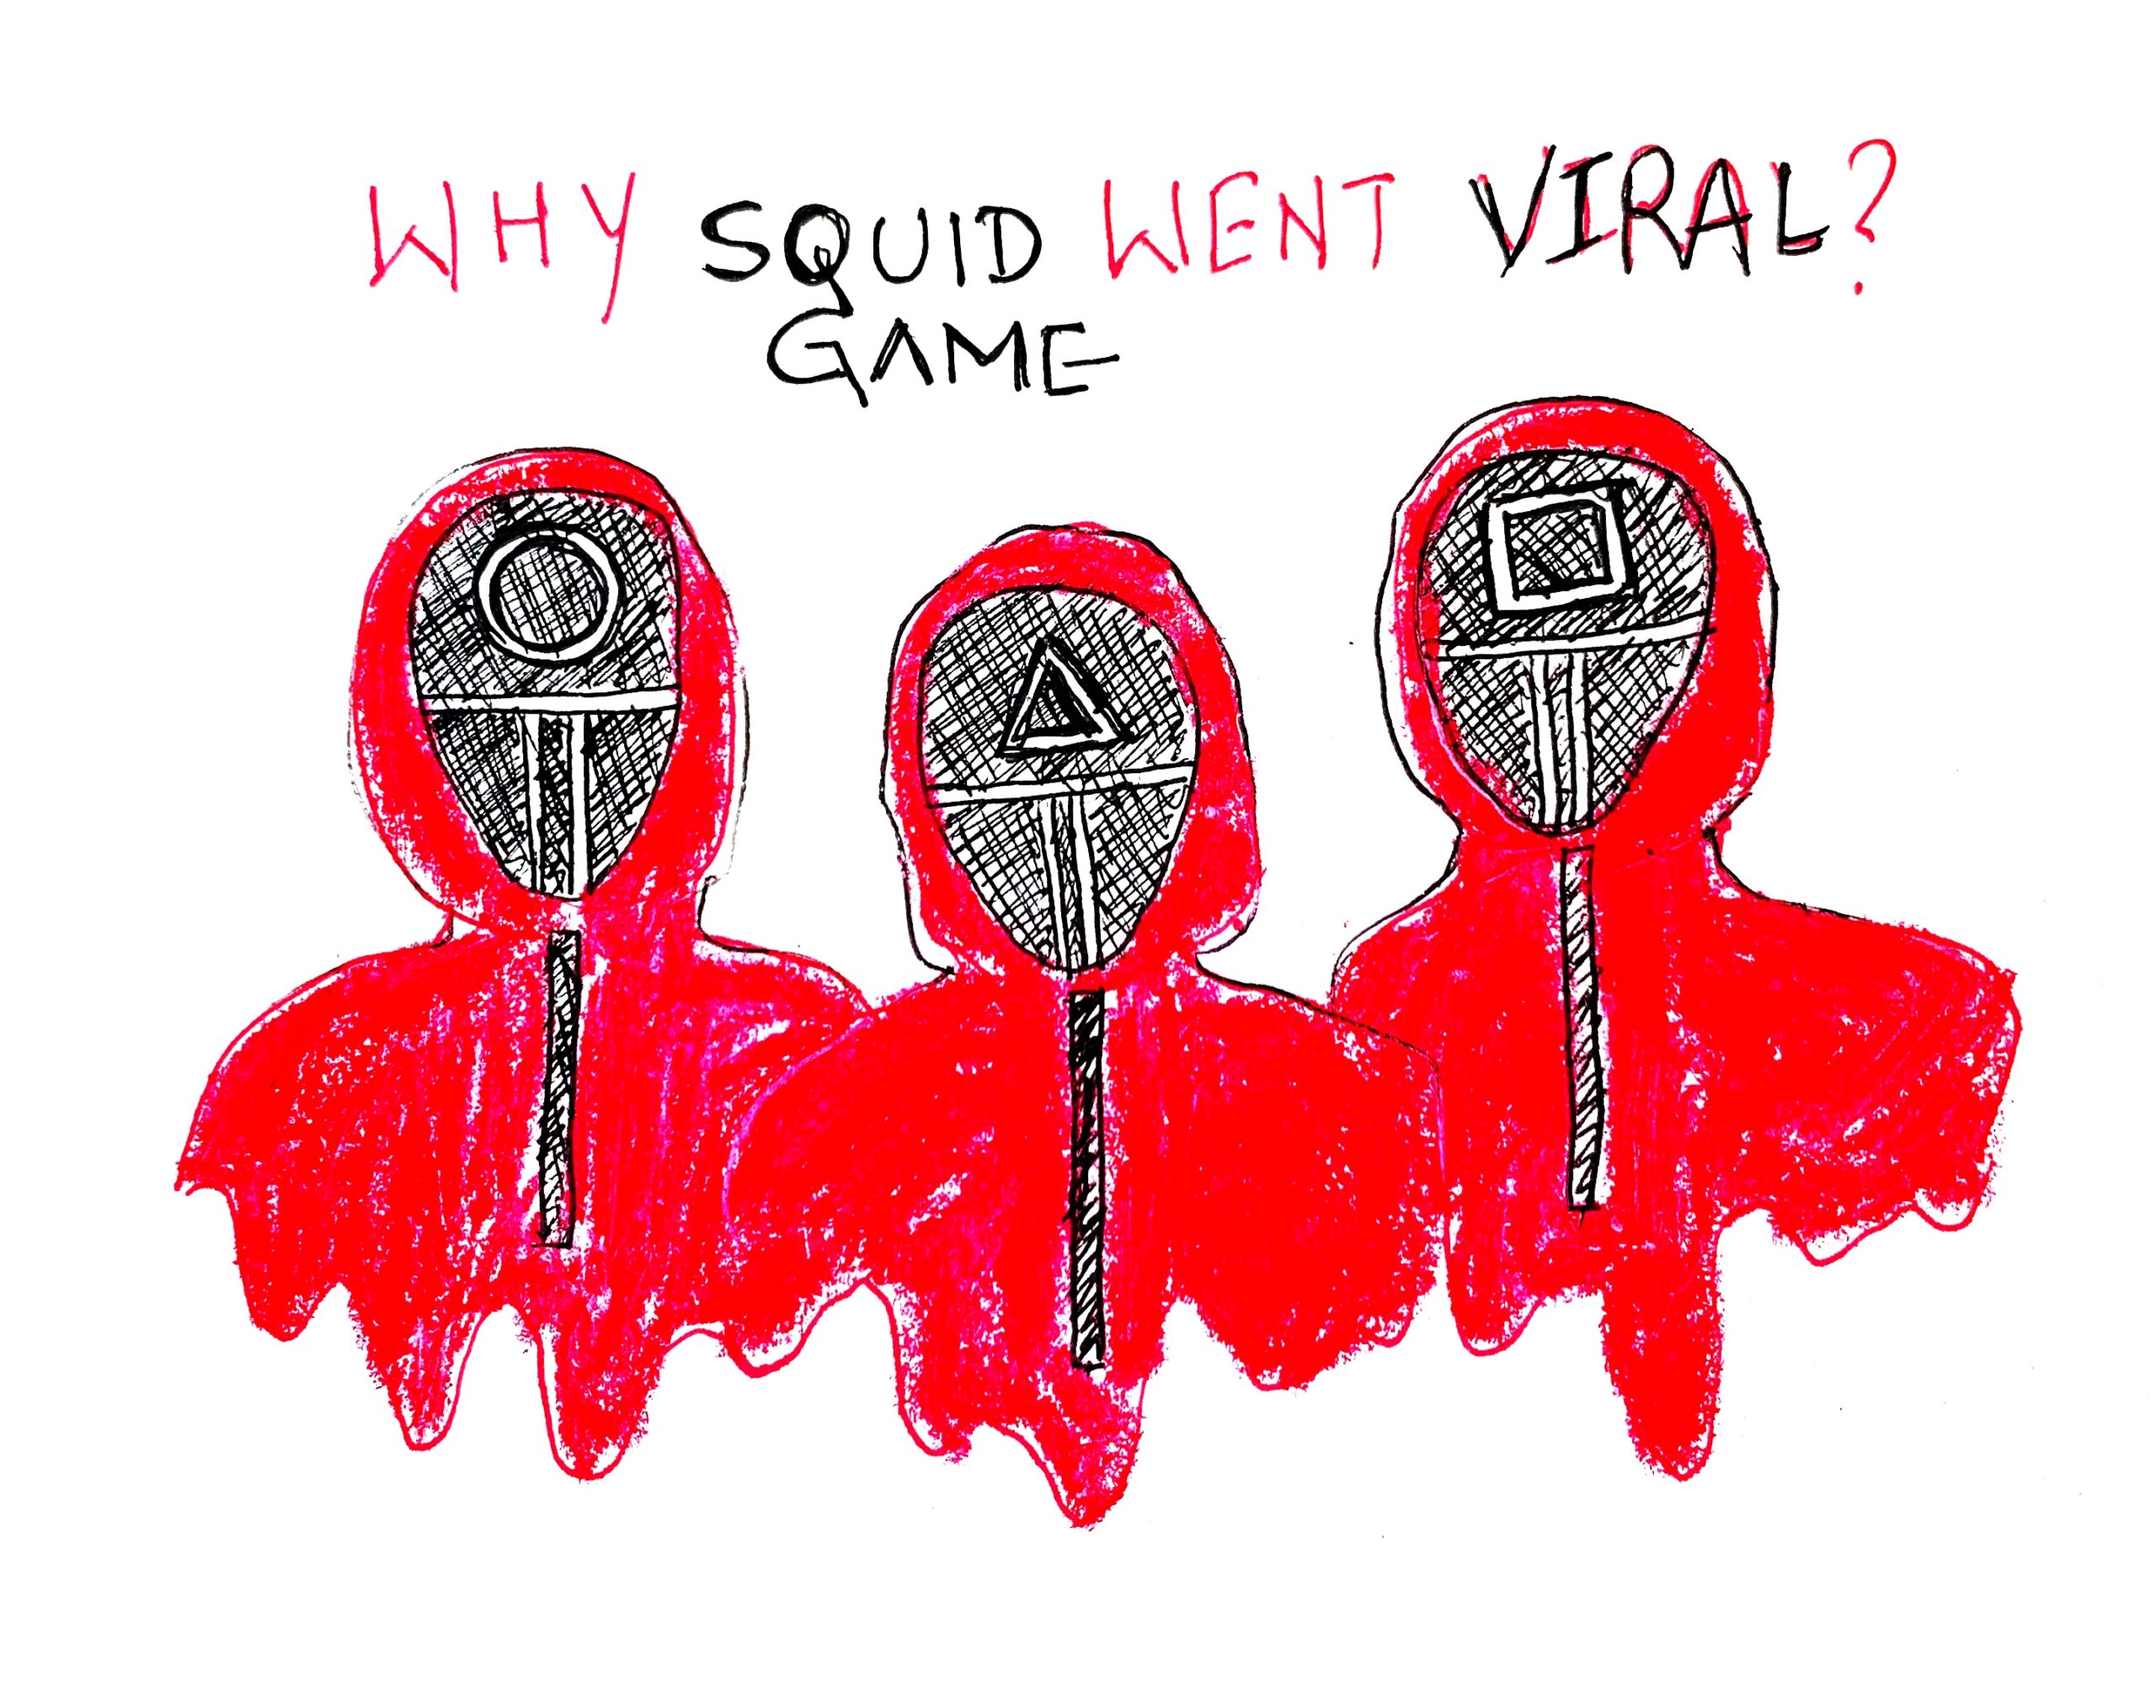 What is Squid Game about? Inside the games and symbols of the